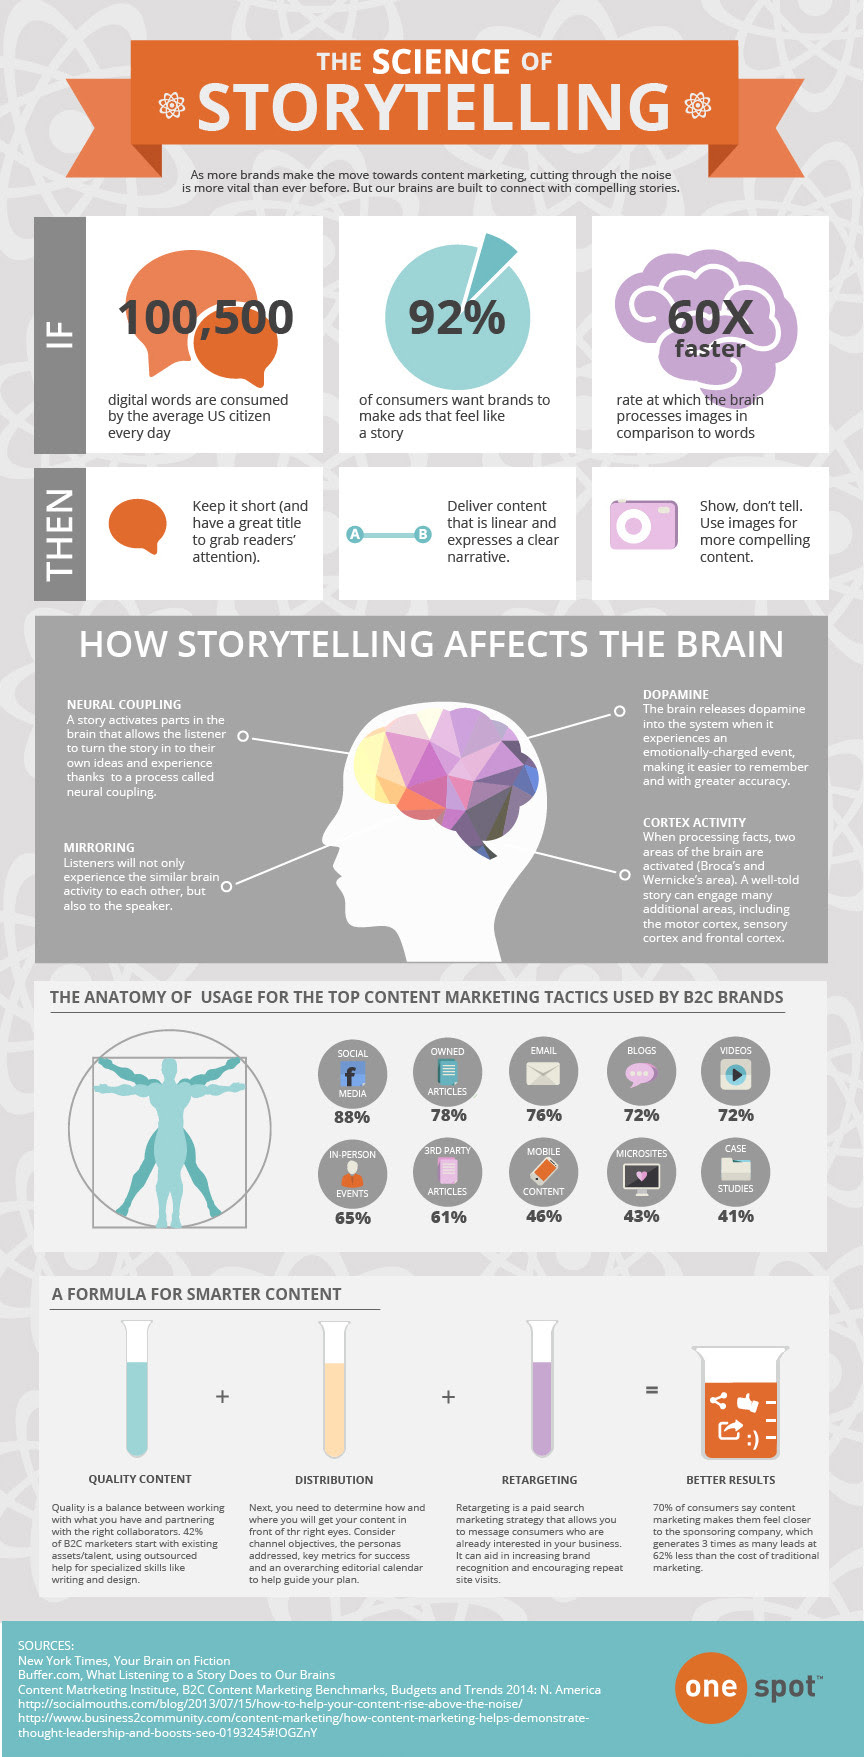 The Science of Storytelling #infographic ~ Visualistan